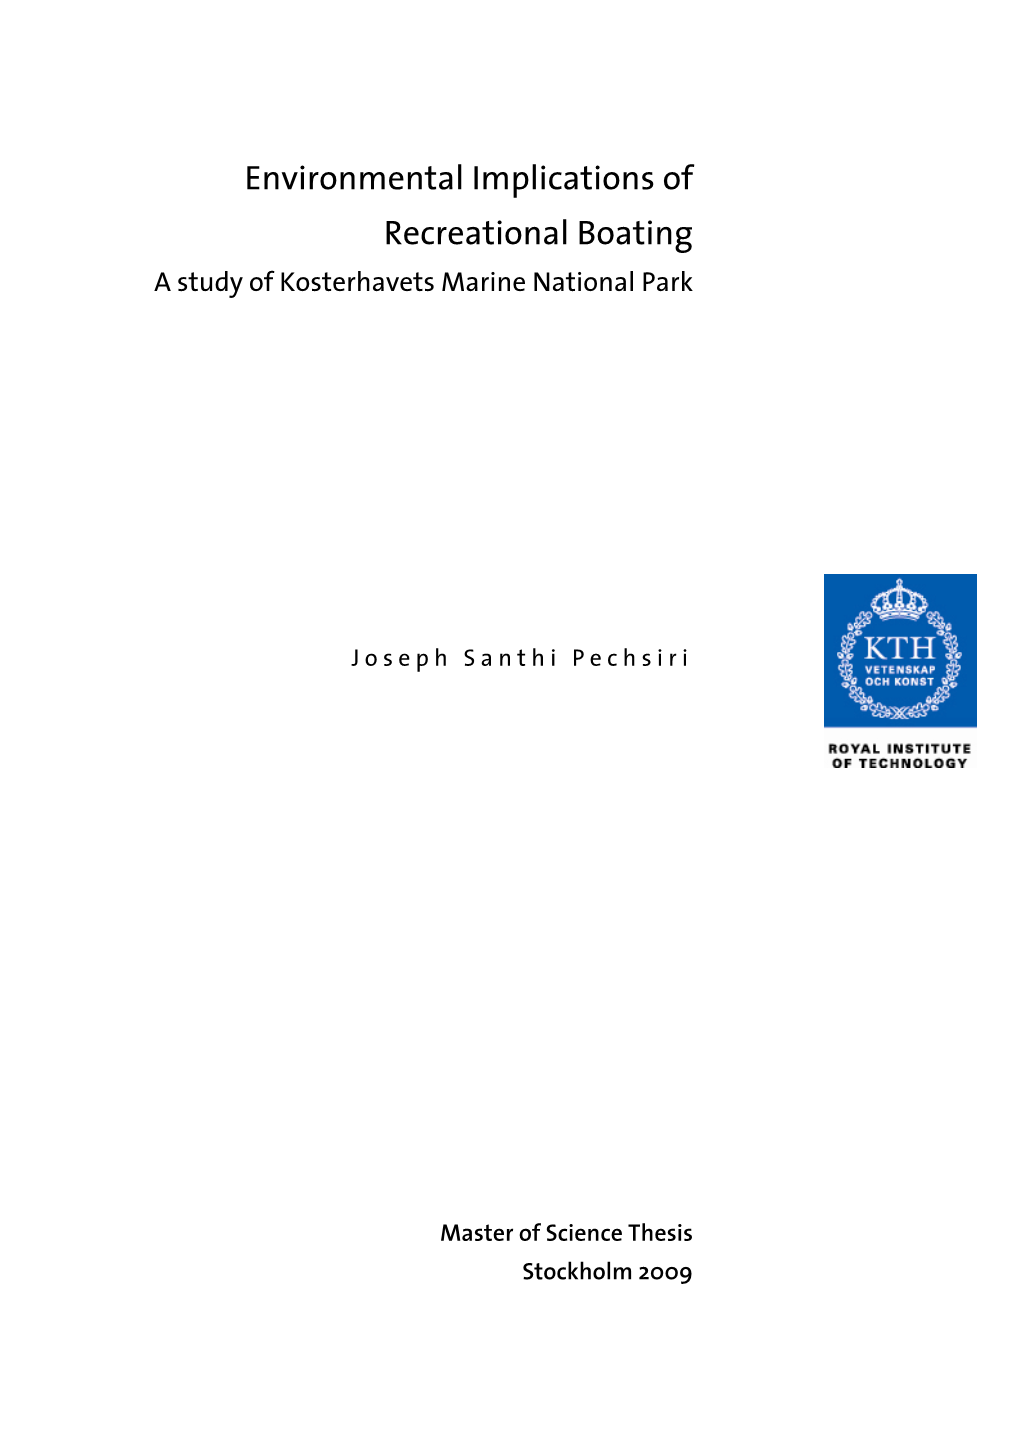 Environmental Implications of Recreational Boating a Study of Kosterhavets Marine National Park